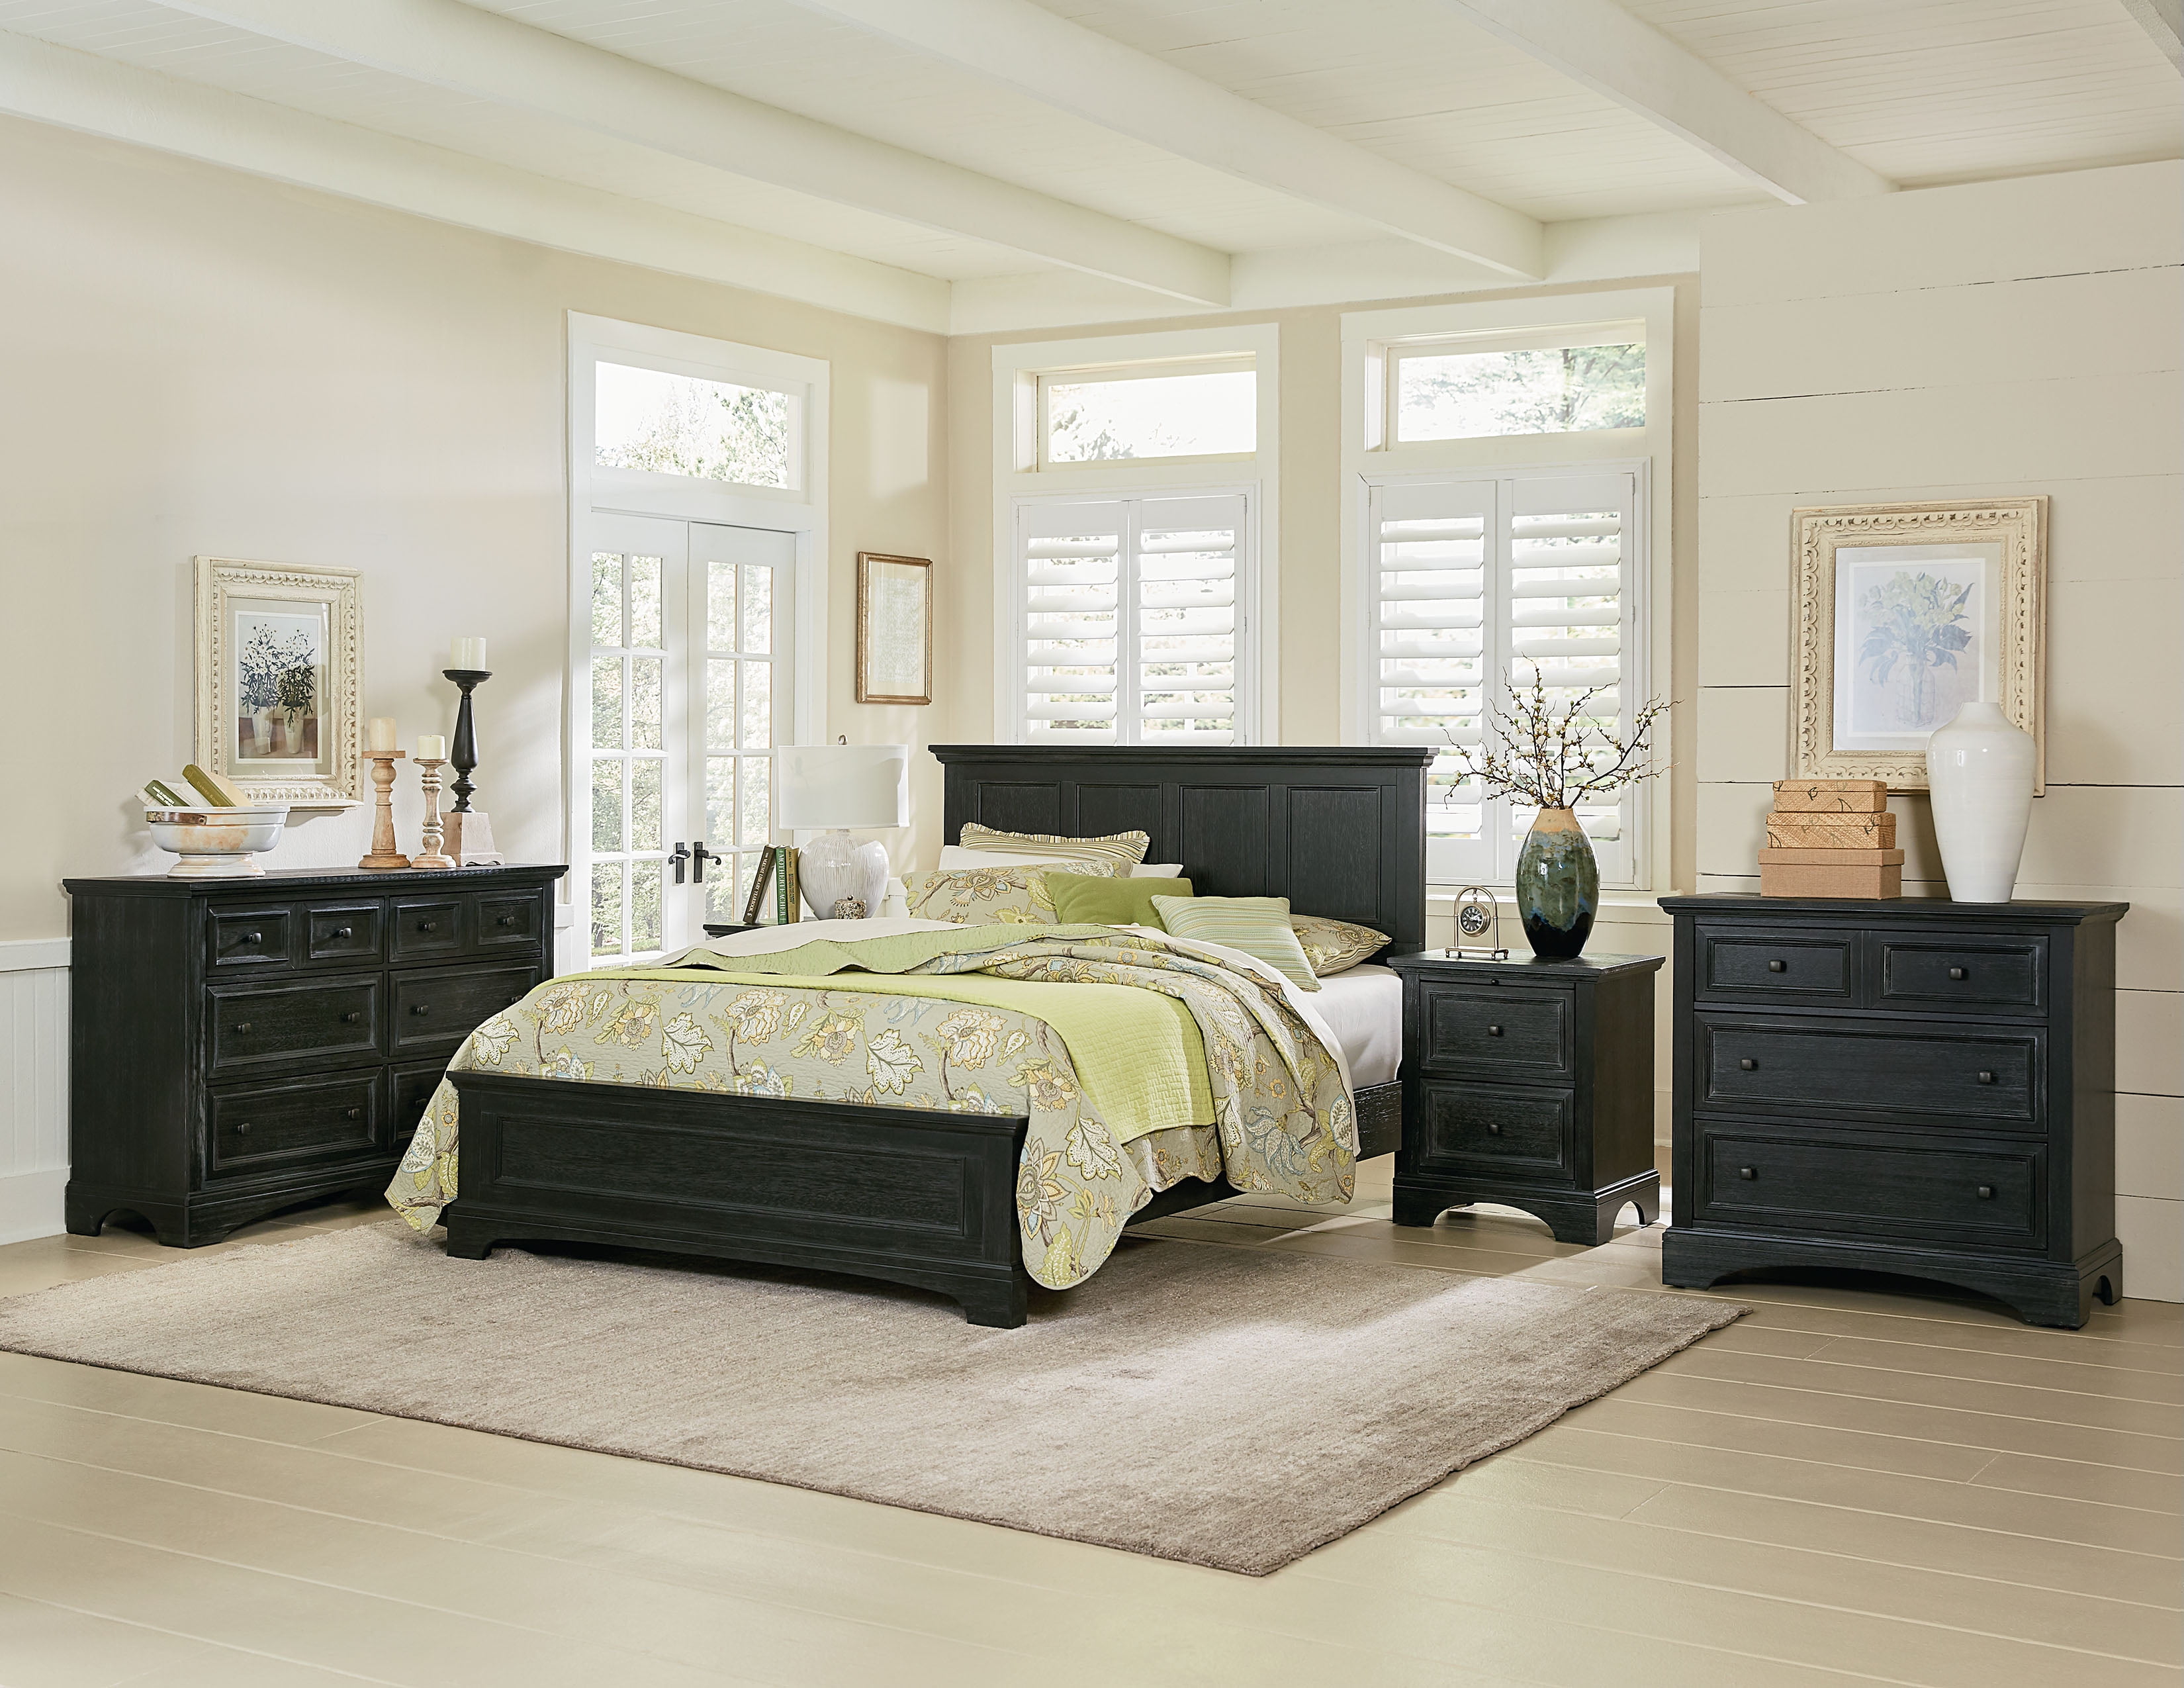 Osp Home Furnishings Farmhouse Basics, Black Bedroom Dressers And Nightstands